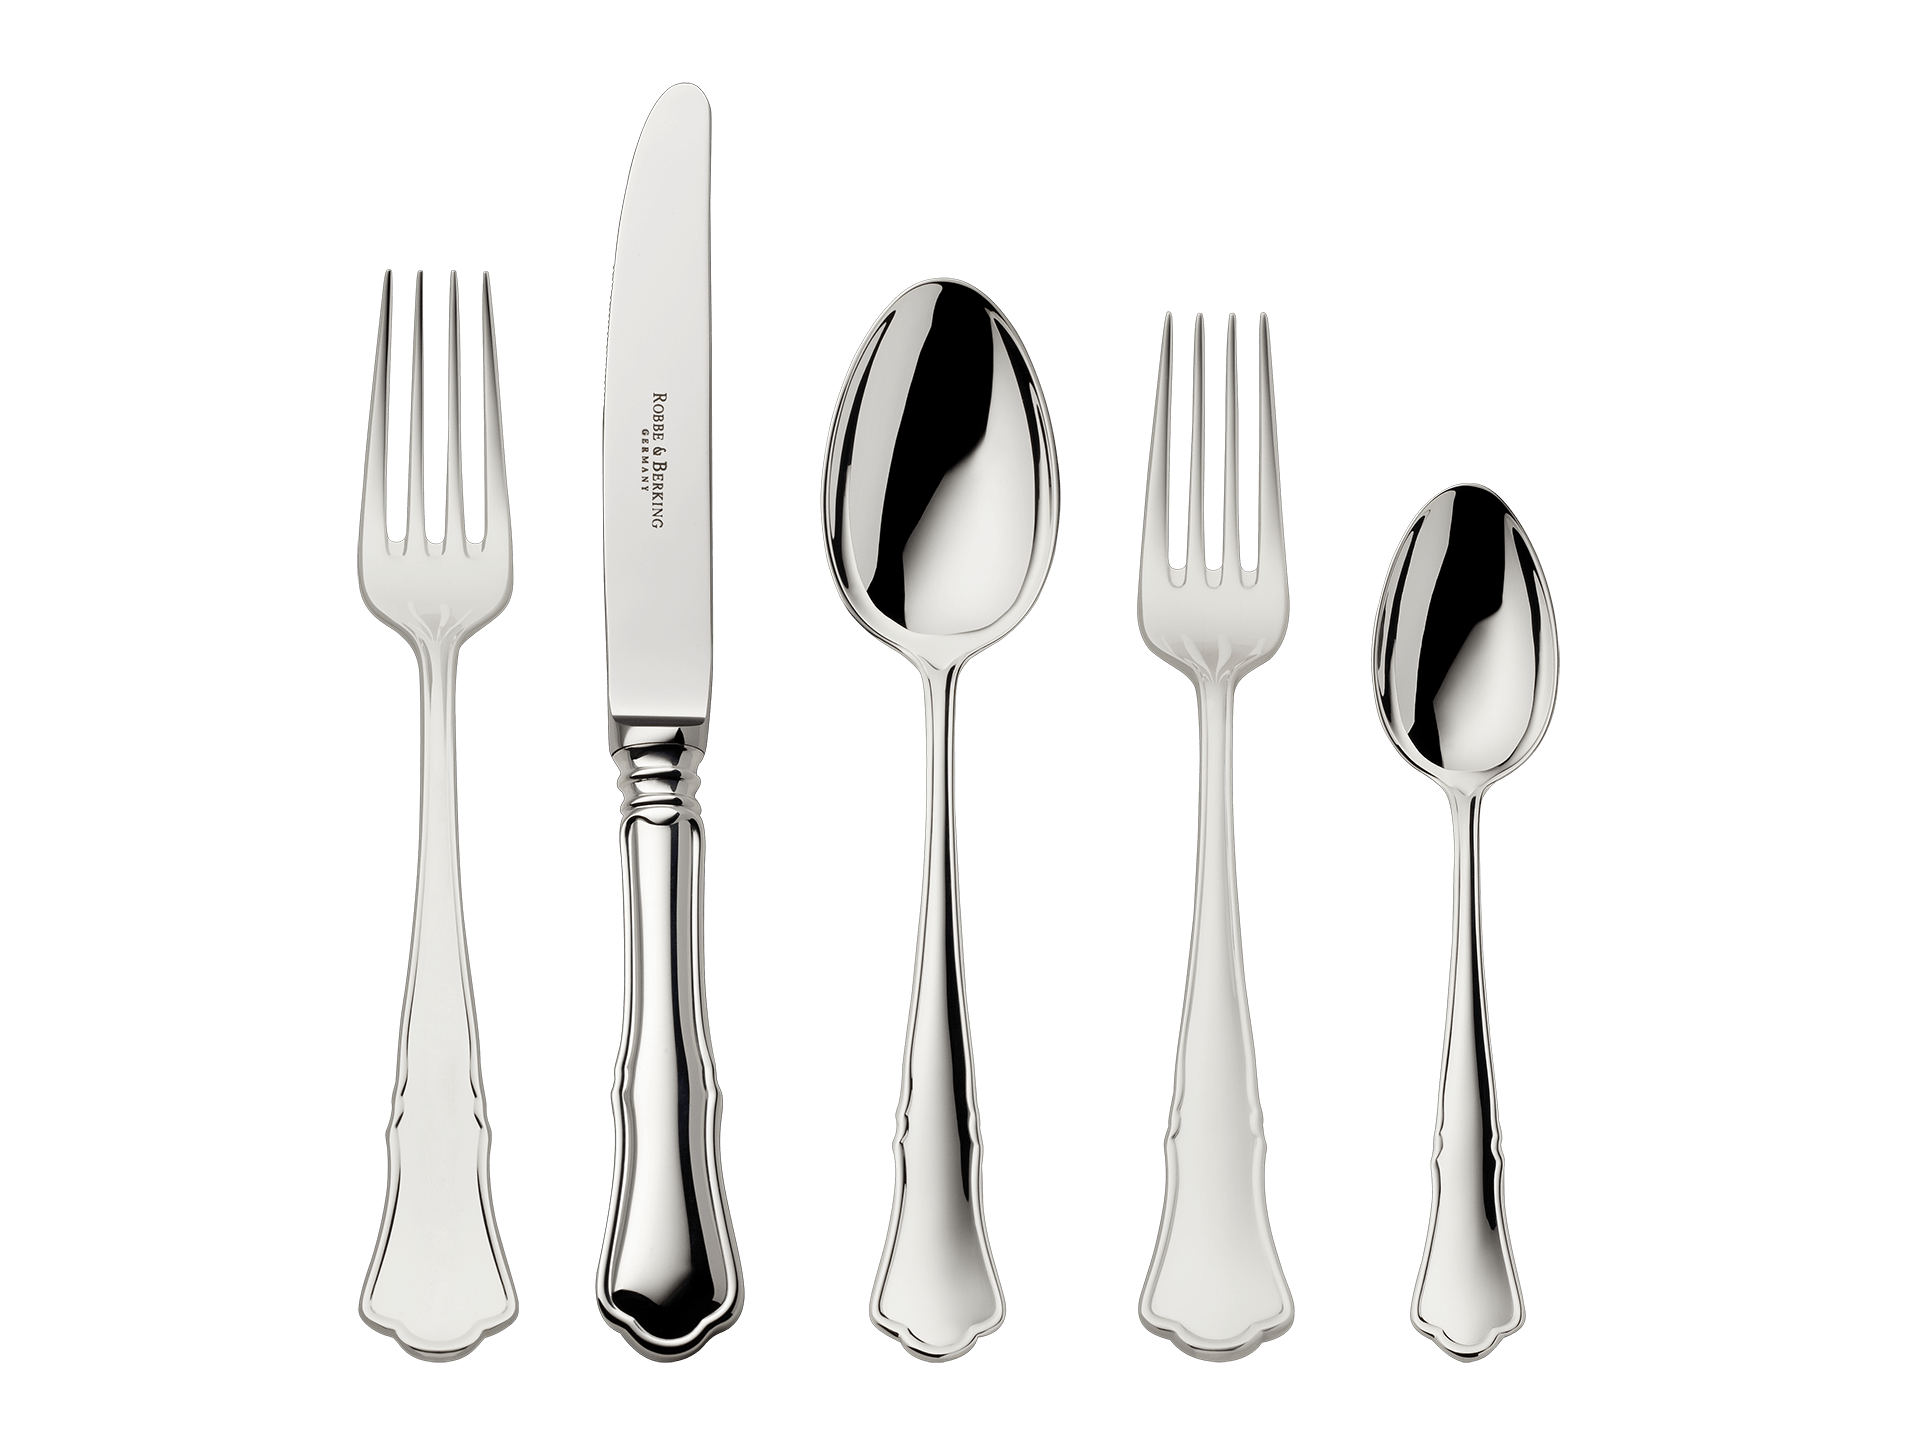 Alt-Chippendale 5-piece place setting (150g massive silverplated)